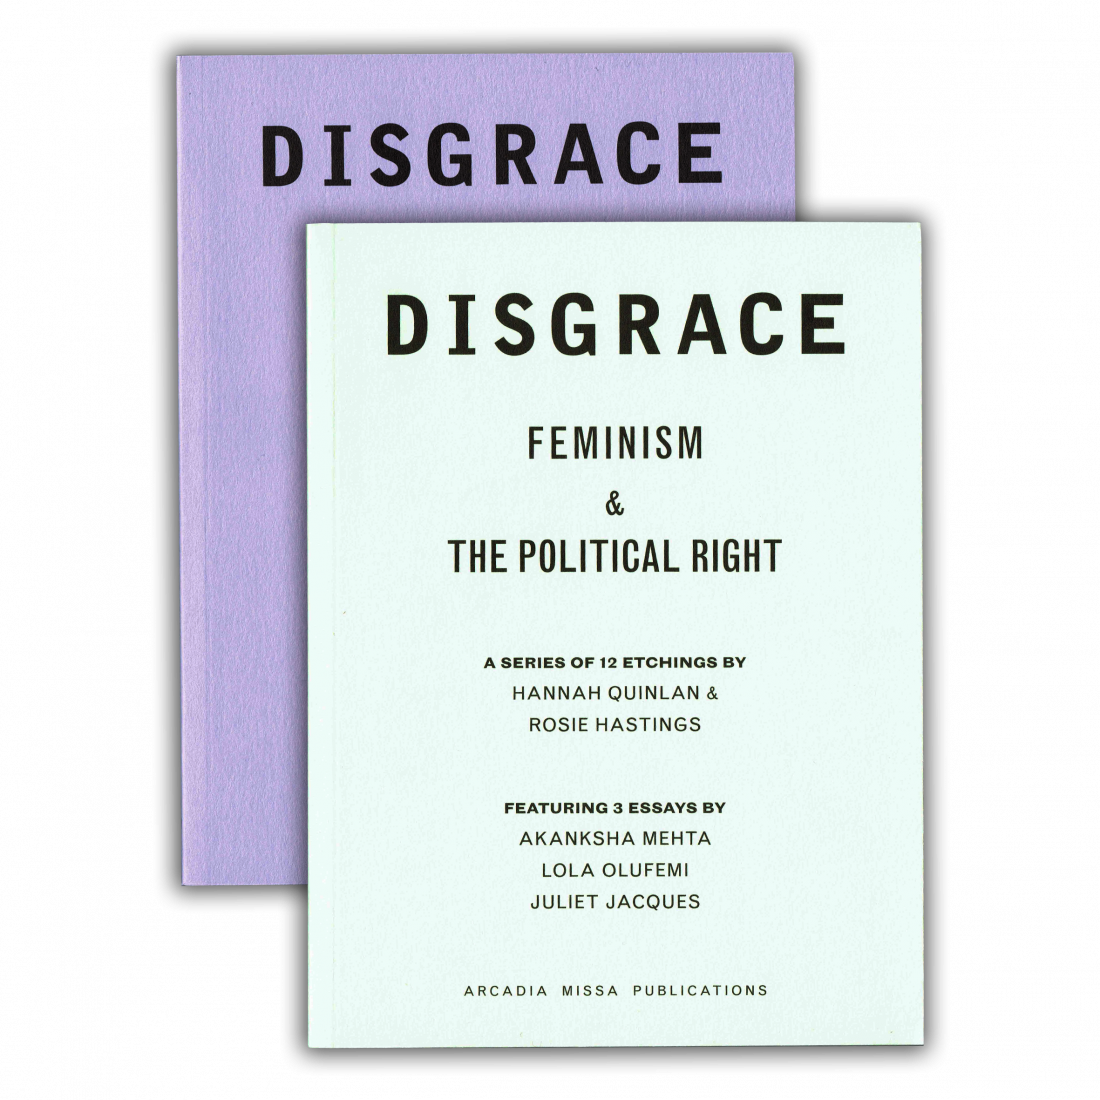 <p>Disgrace: Feminism and the Political Right by Hannah Quinlan and Rosie Hastings</p>
